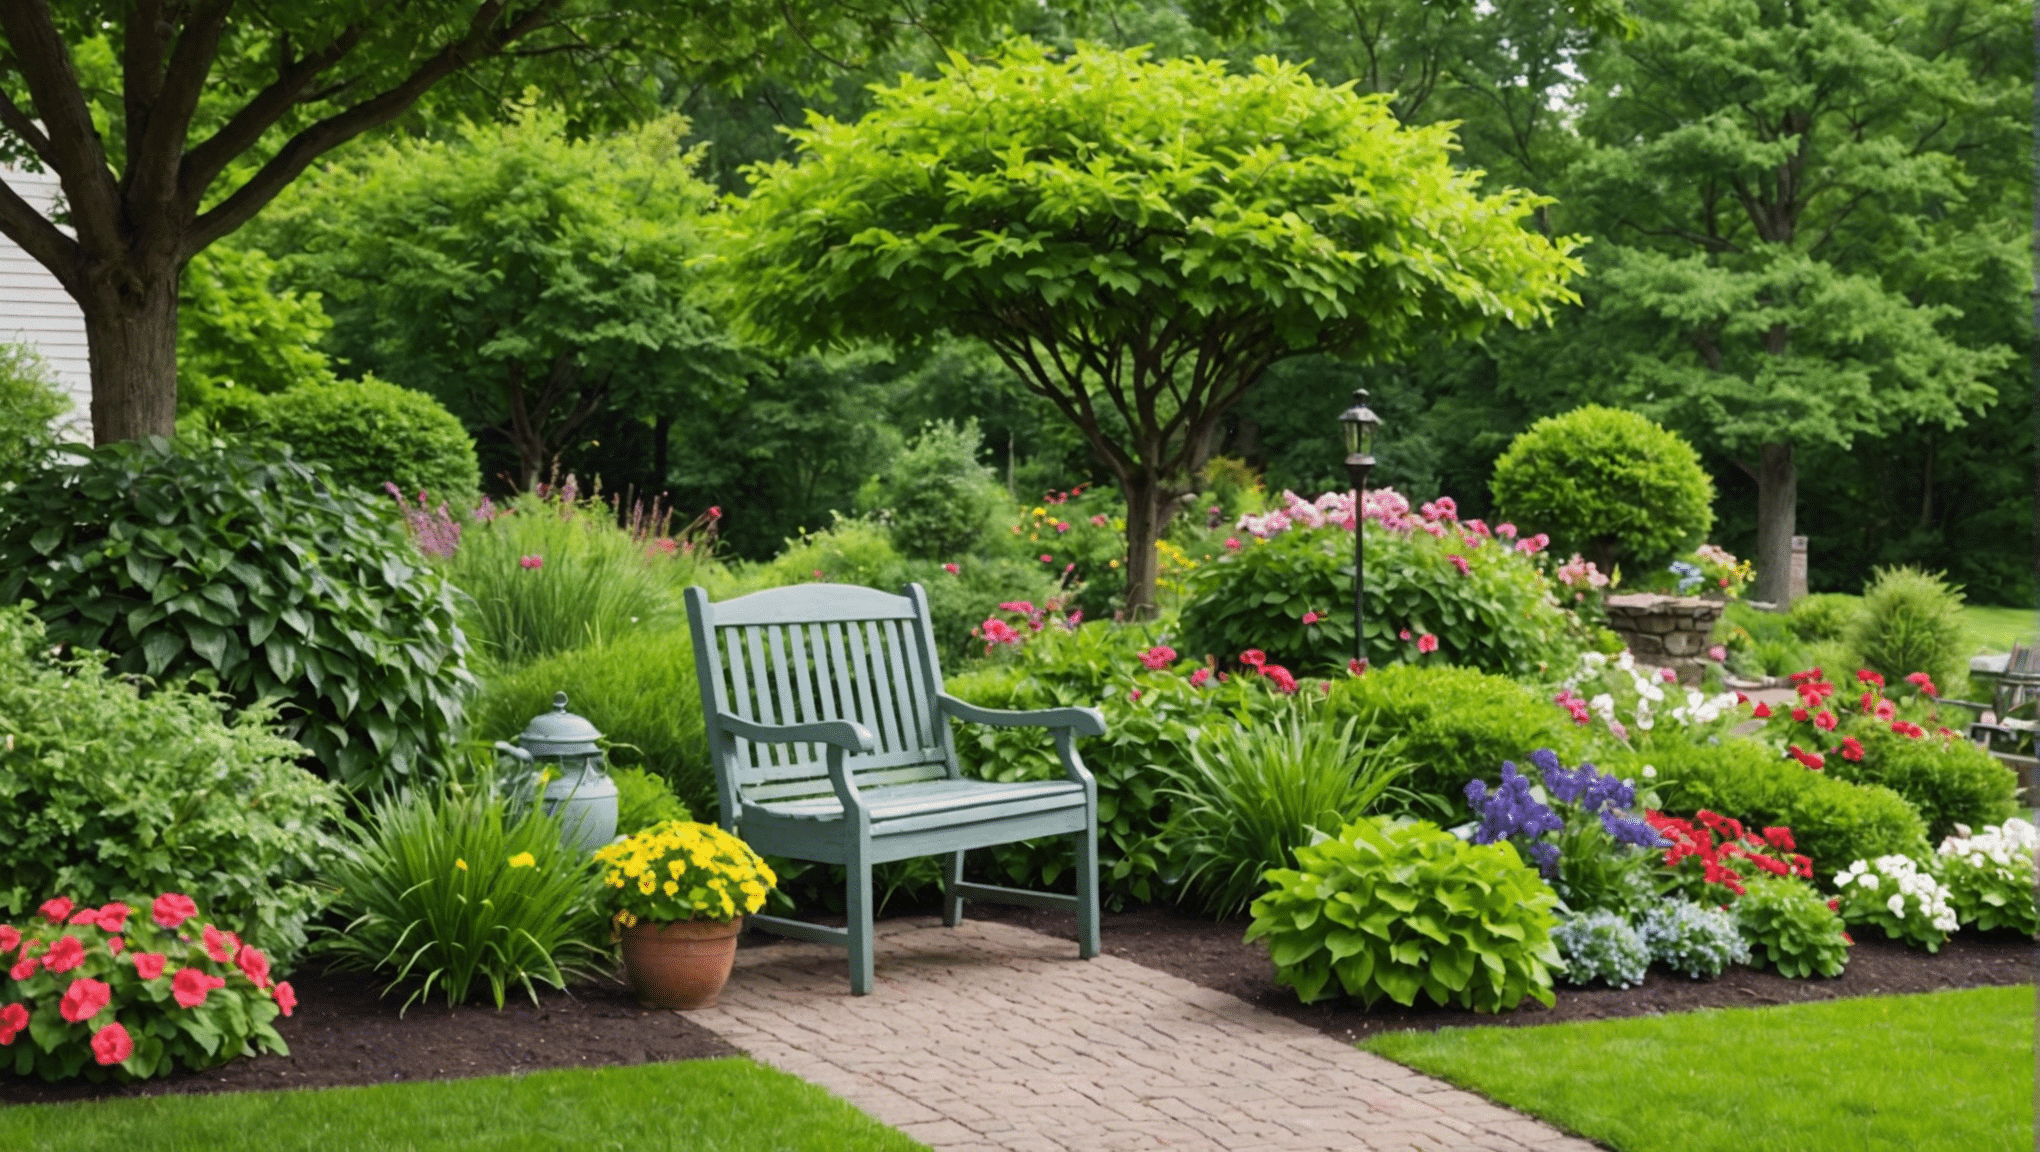 discover unique retirement gardening gift ideas to make the perfect present for green-thumbed retirees. from practical tools to beautiful plants, find the best gifts for gardening enthusiasts.